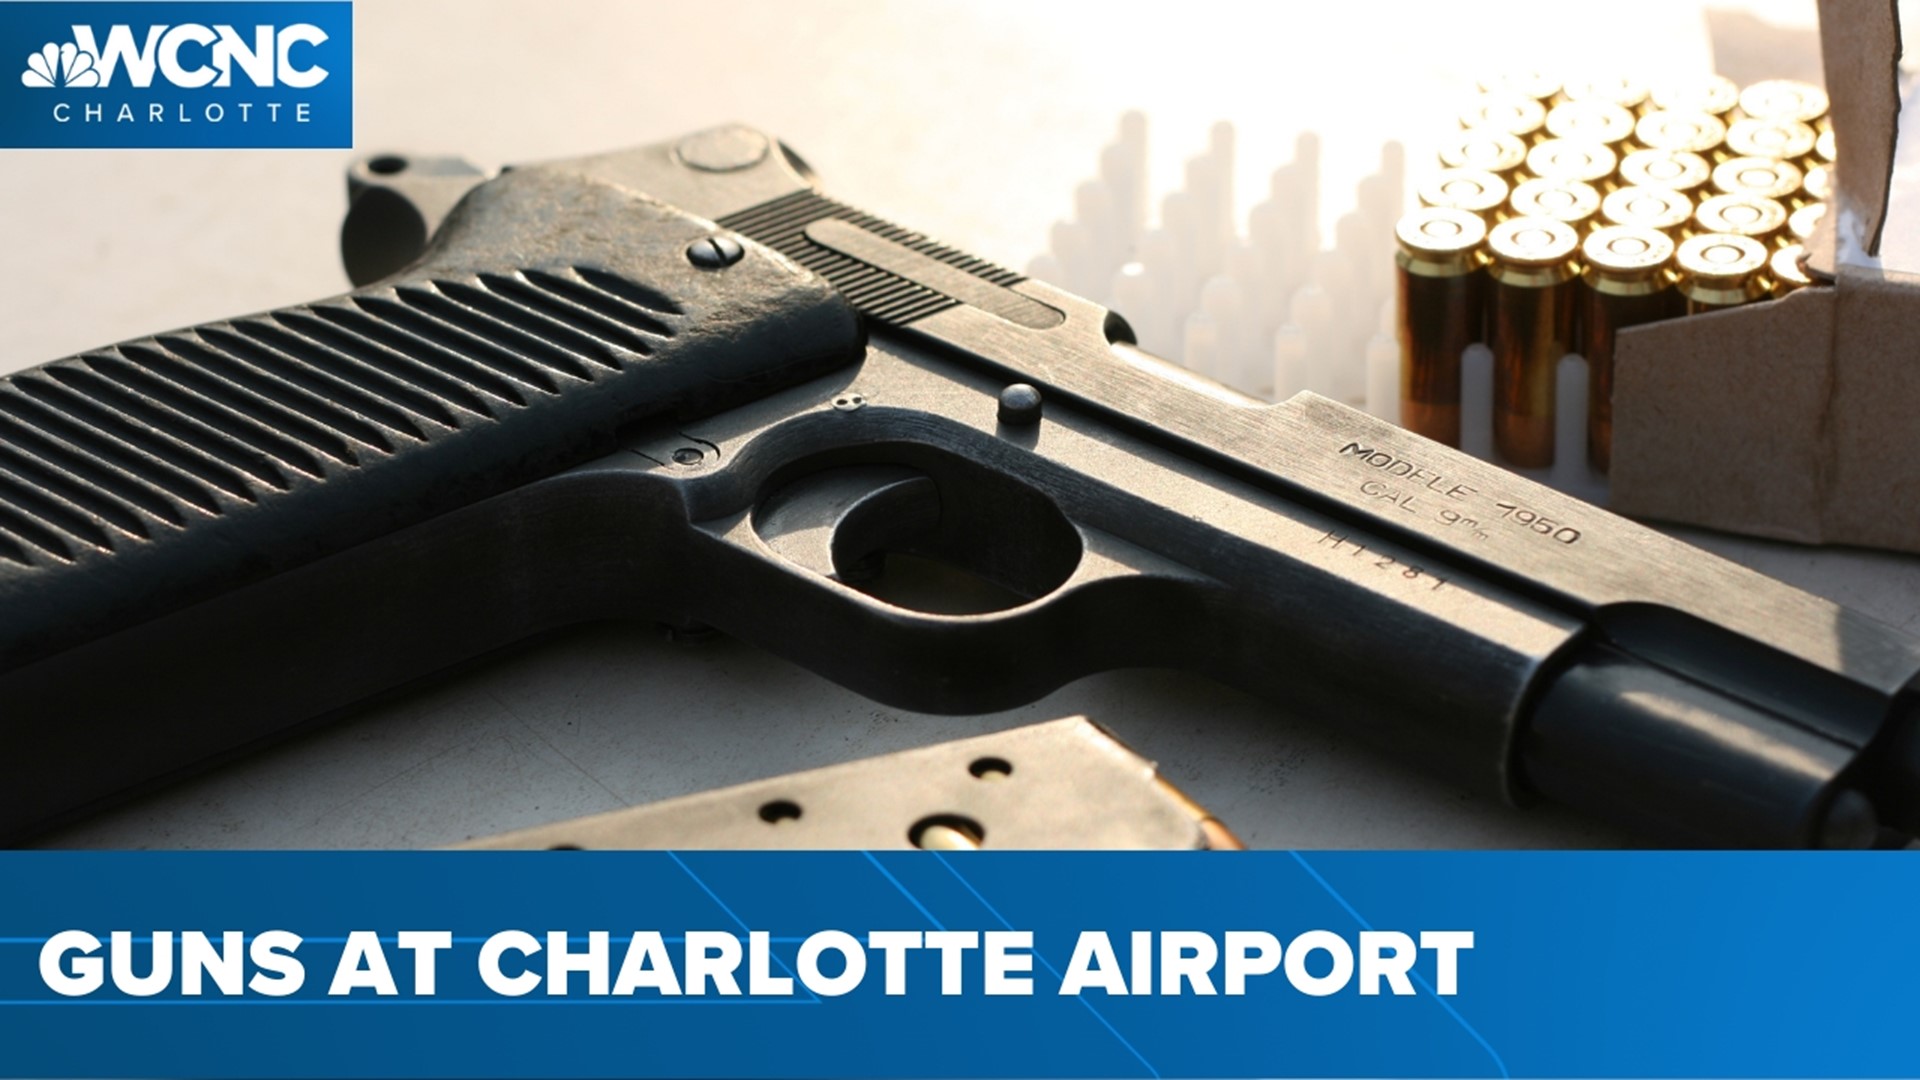 An uptick in guns detected at security checkpoints.